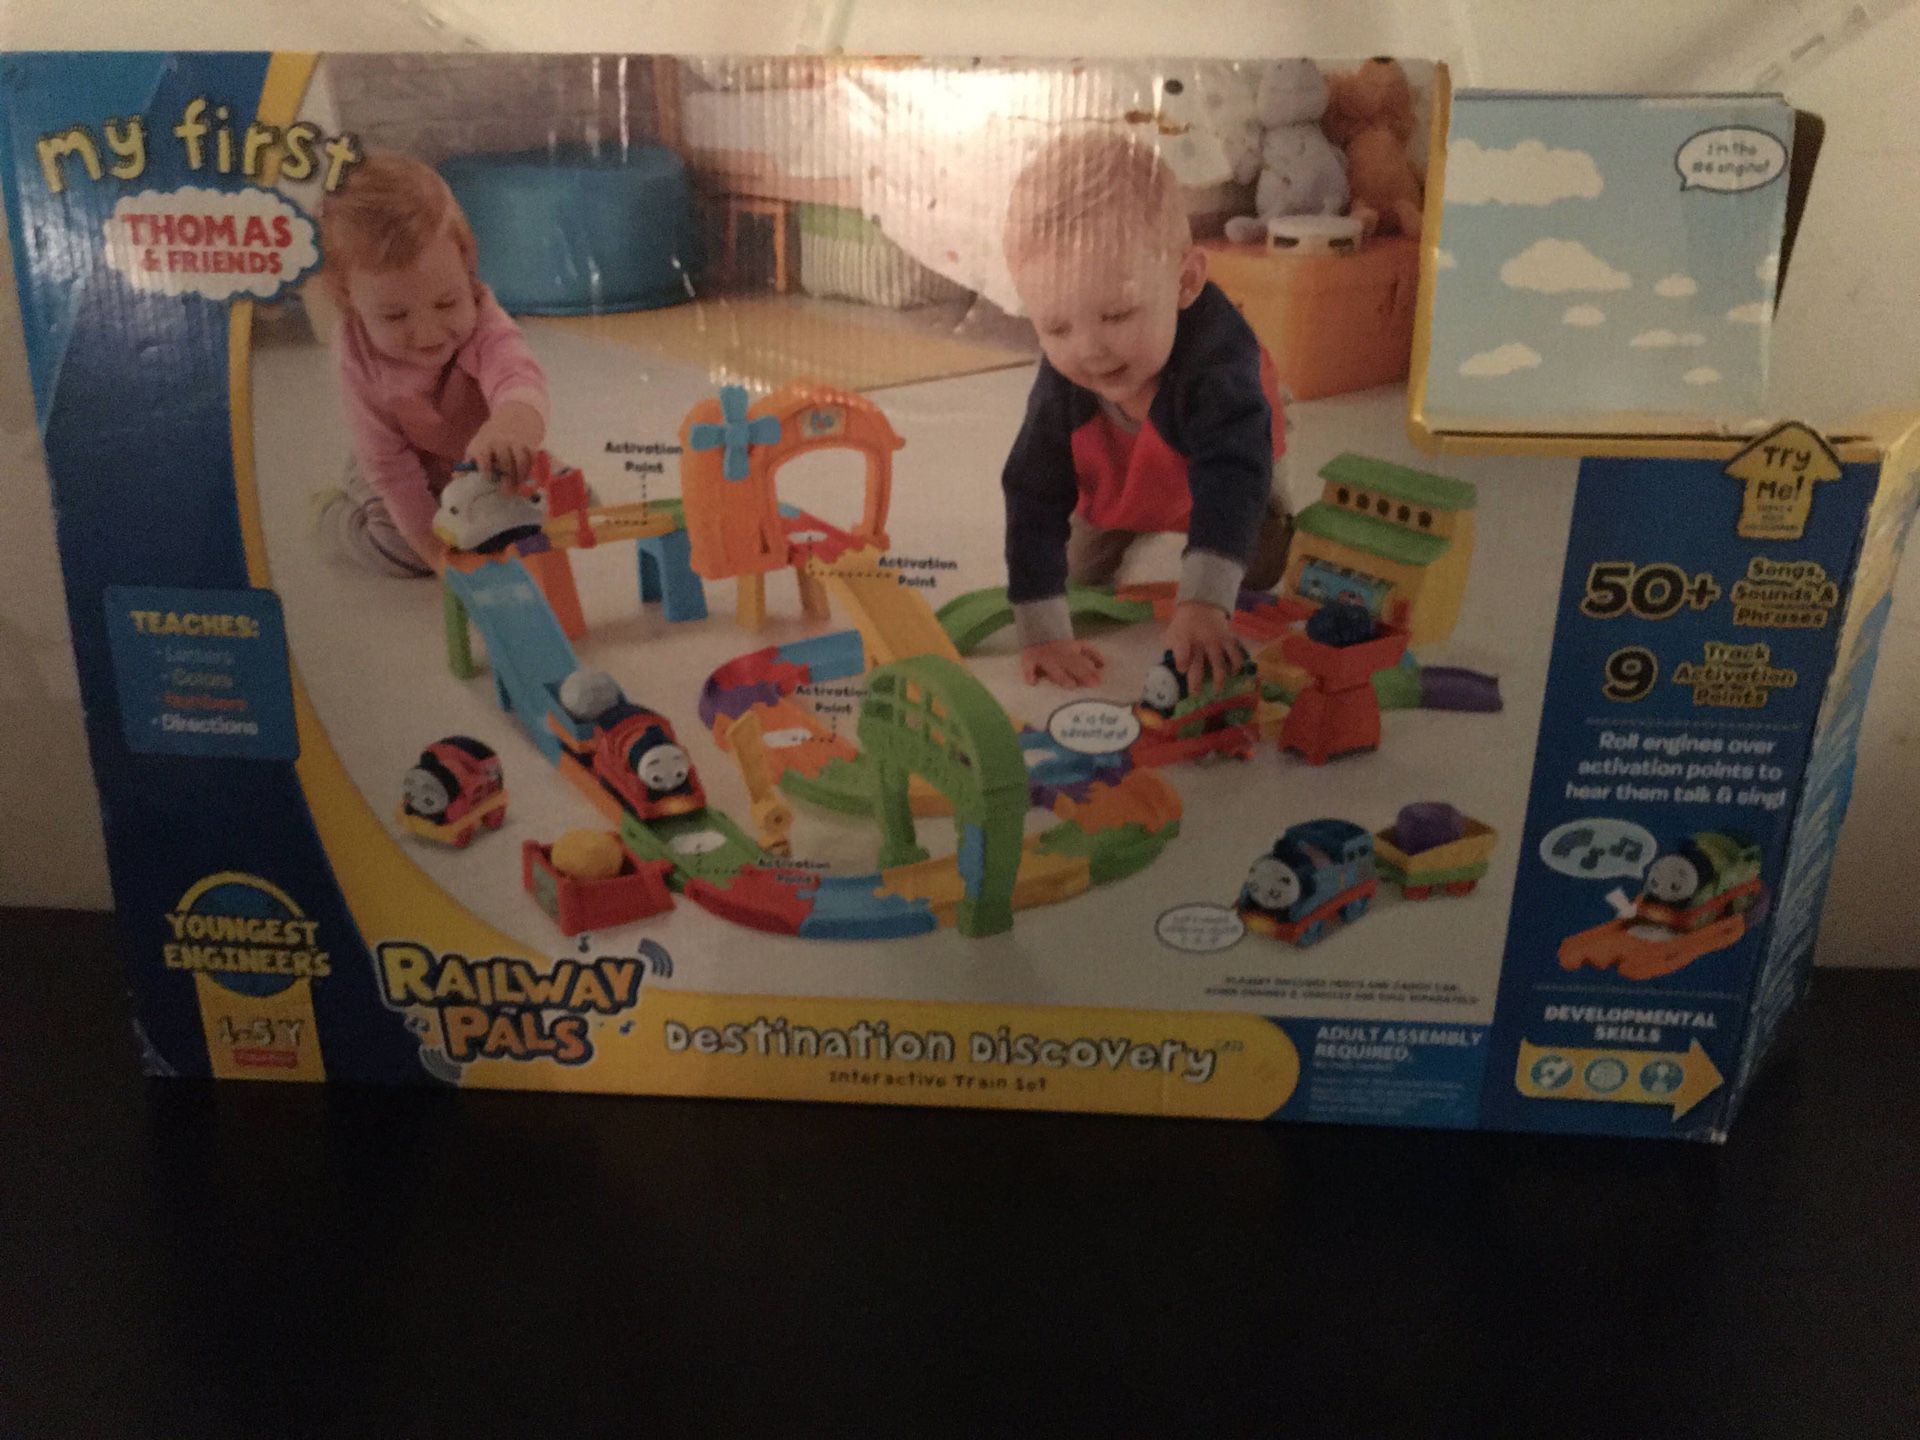 Fisher-Price My First Thomas & Friends, Railway Pals Destination Discovery Train Set